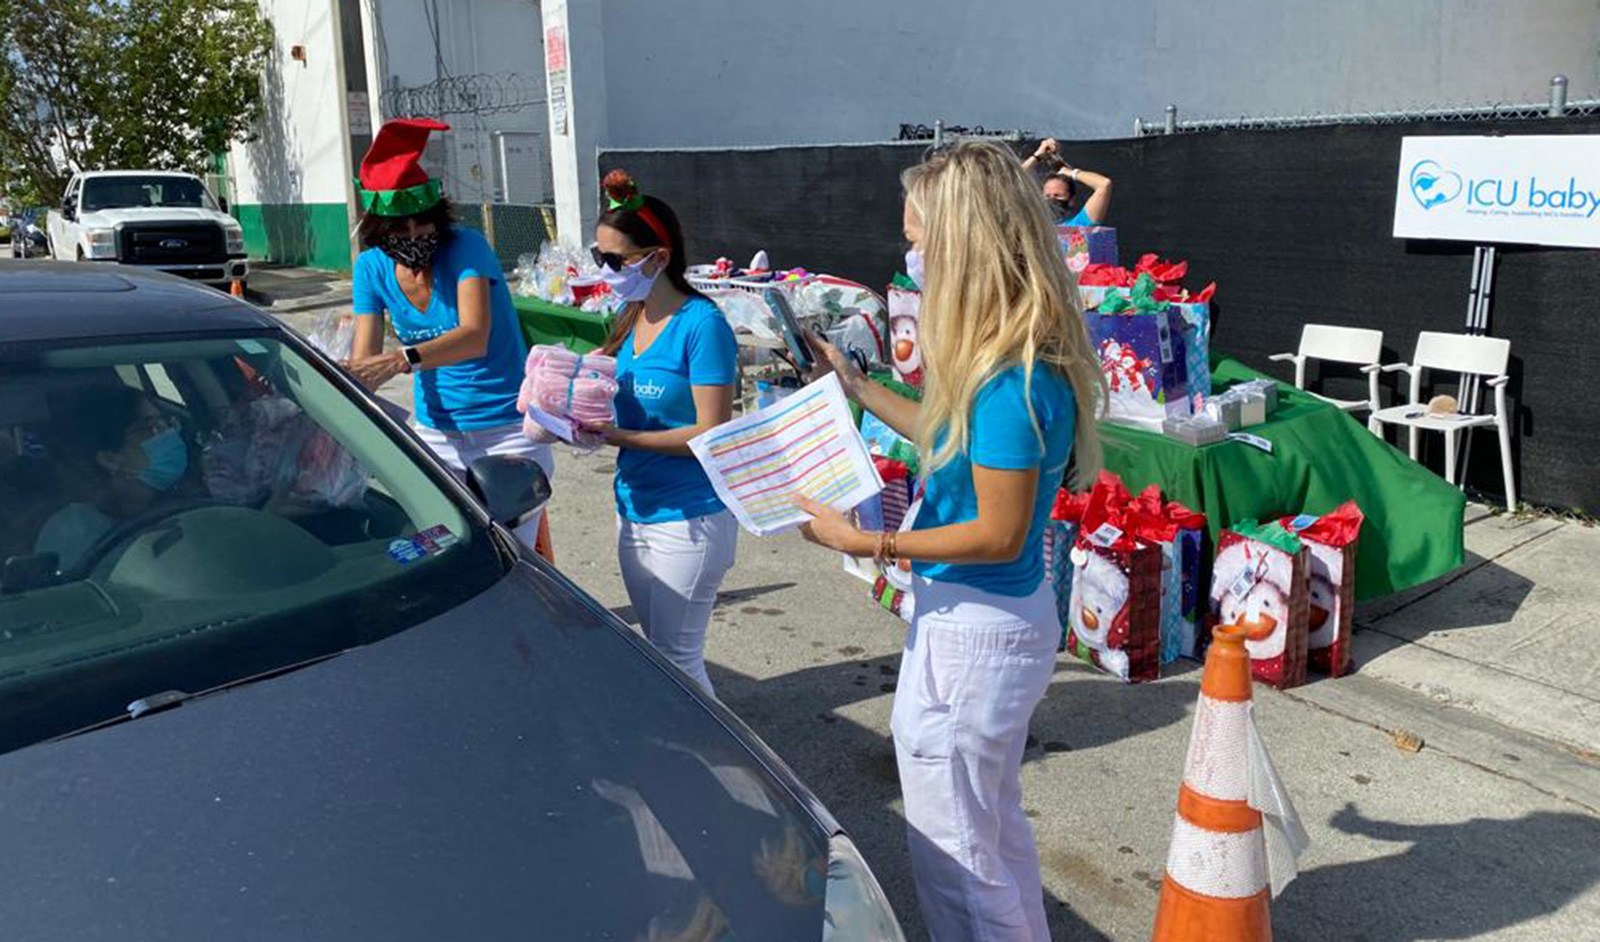 Giving out gifts at A “Drive-Thru” Christmas Celebration